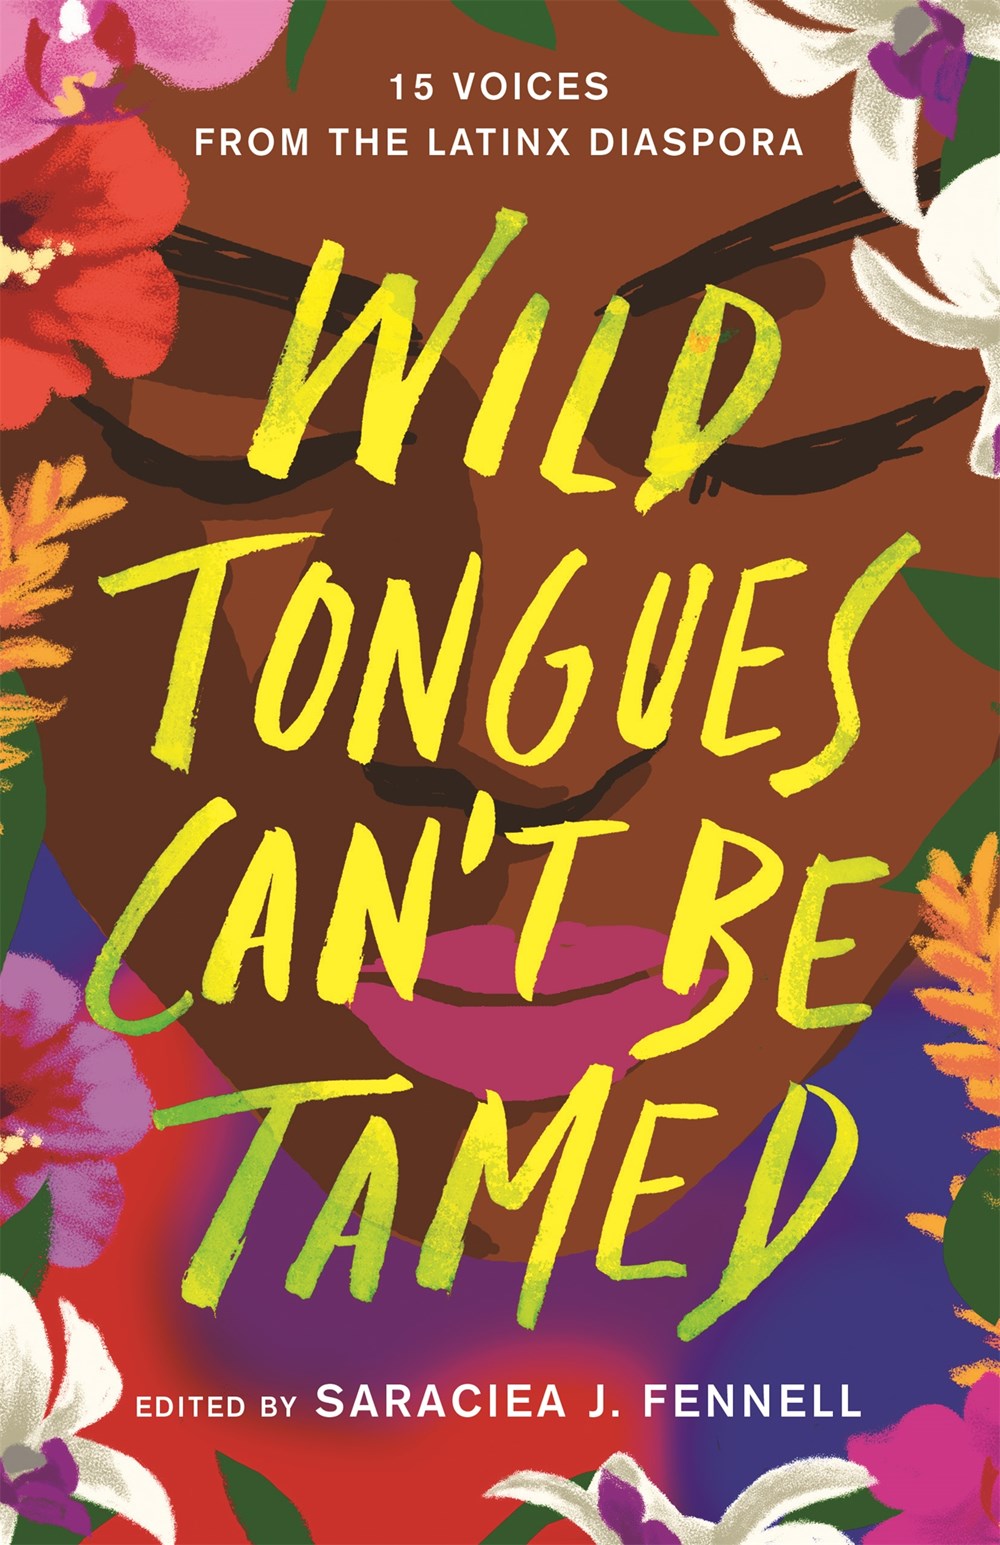 Wild Tongues Can't Be Tamed by Saraciea J. Fennell